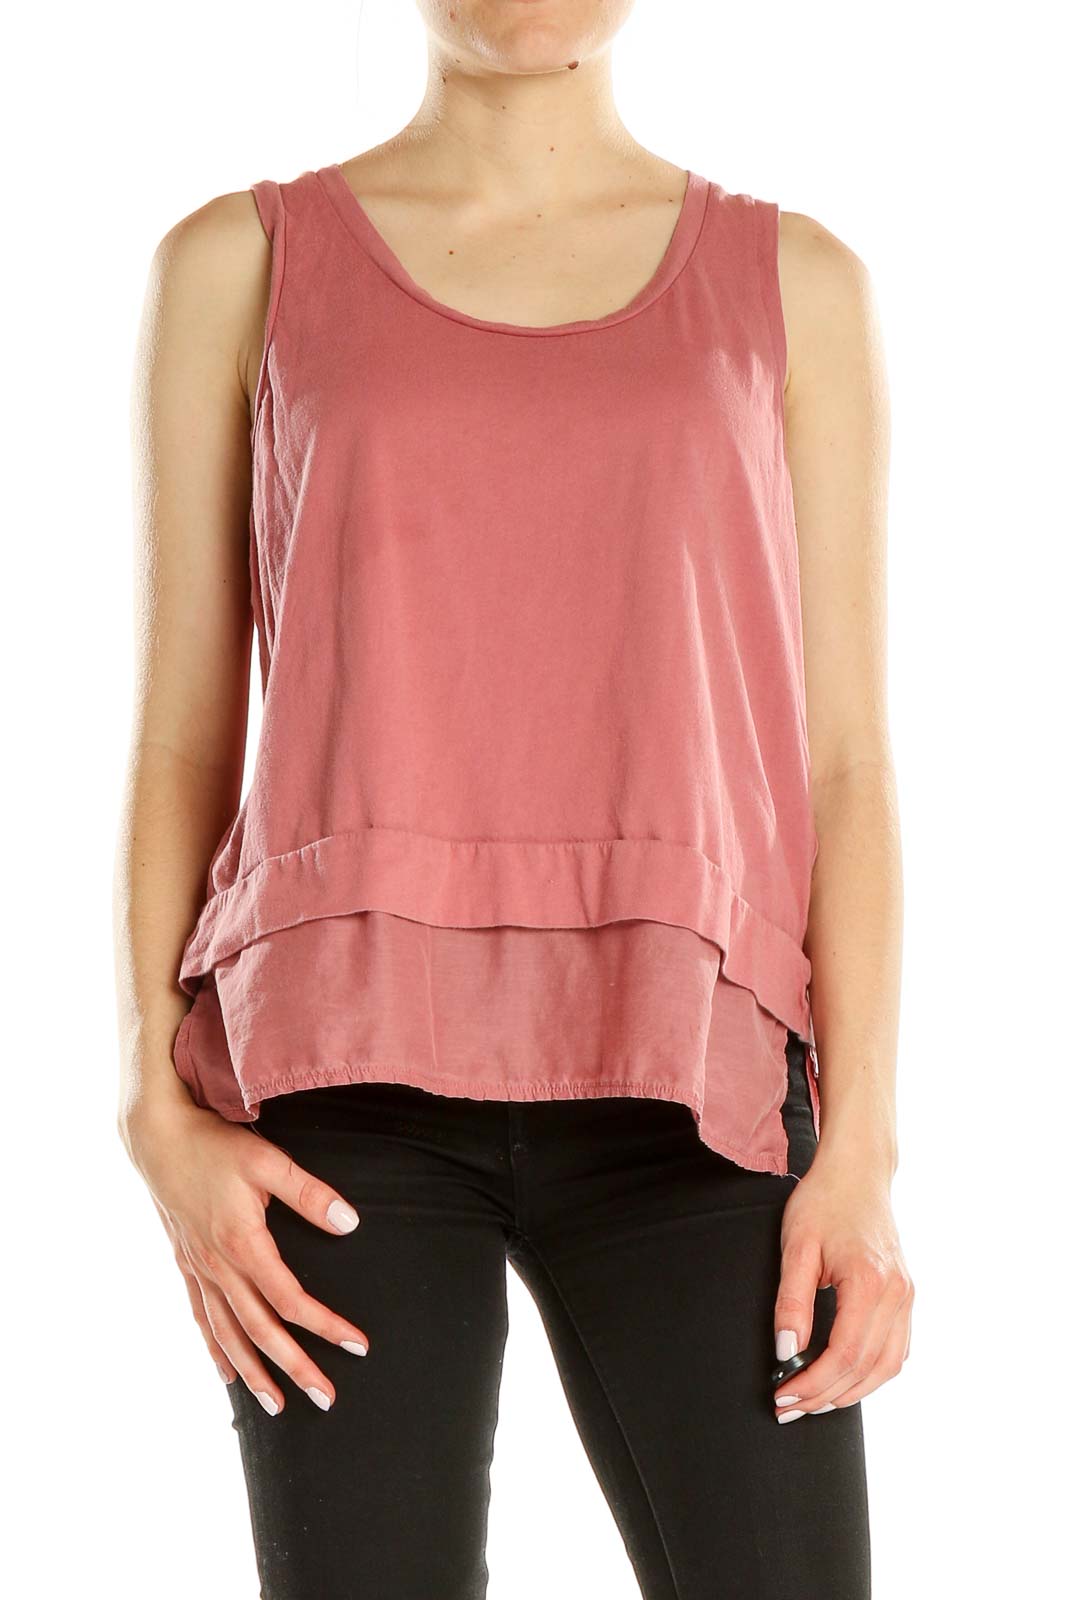 Pink Tank Top Front